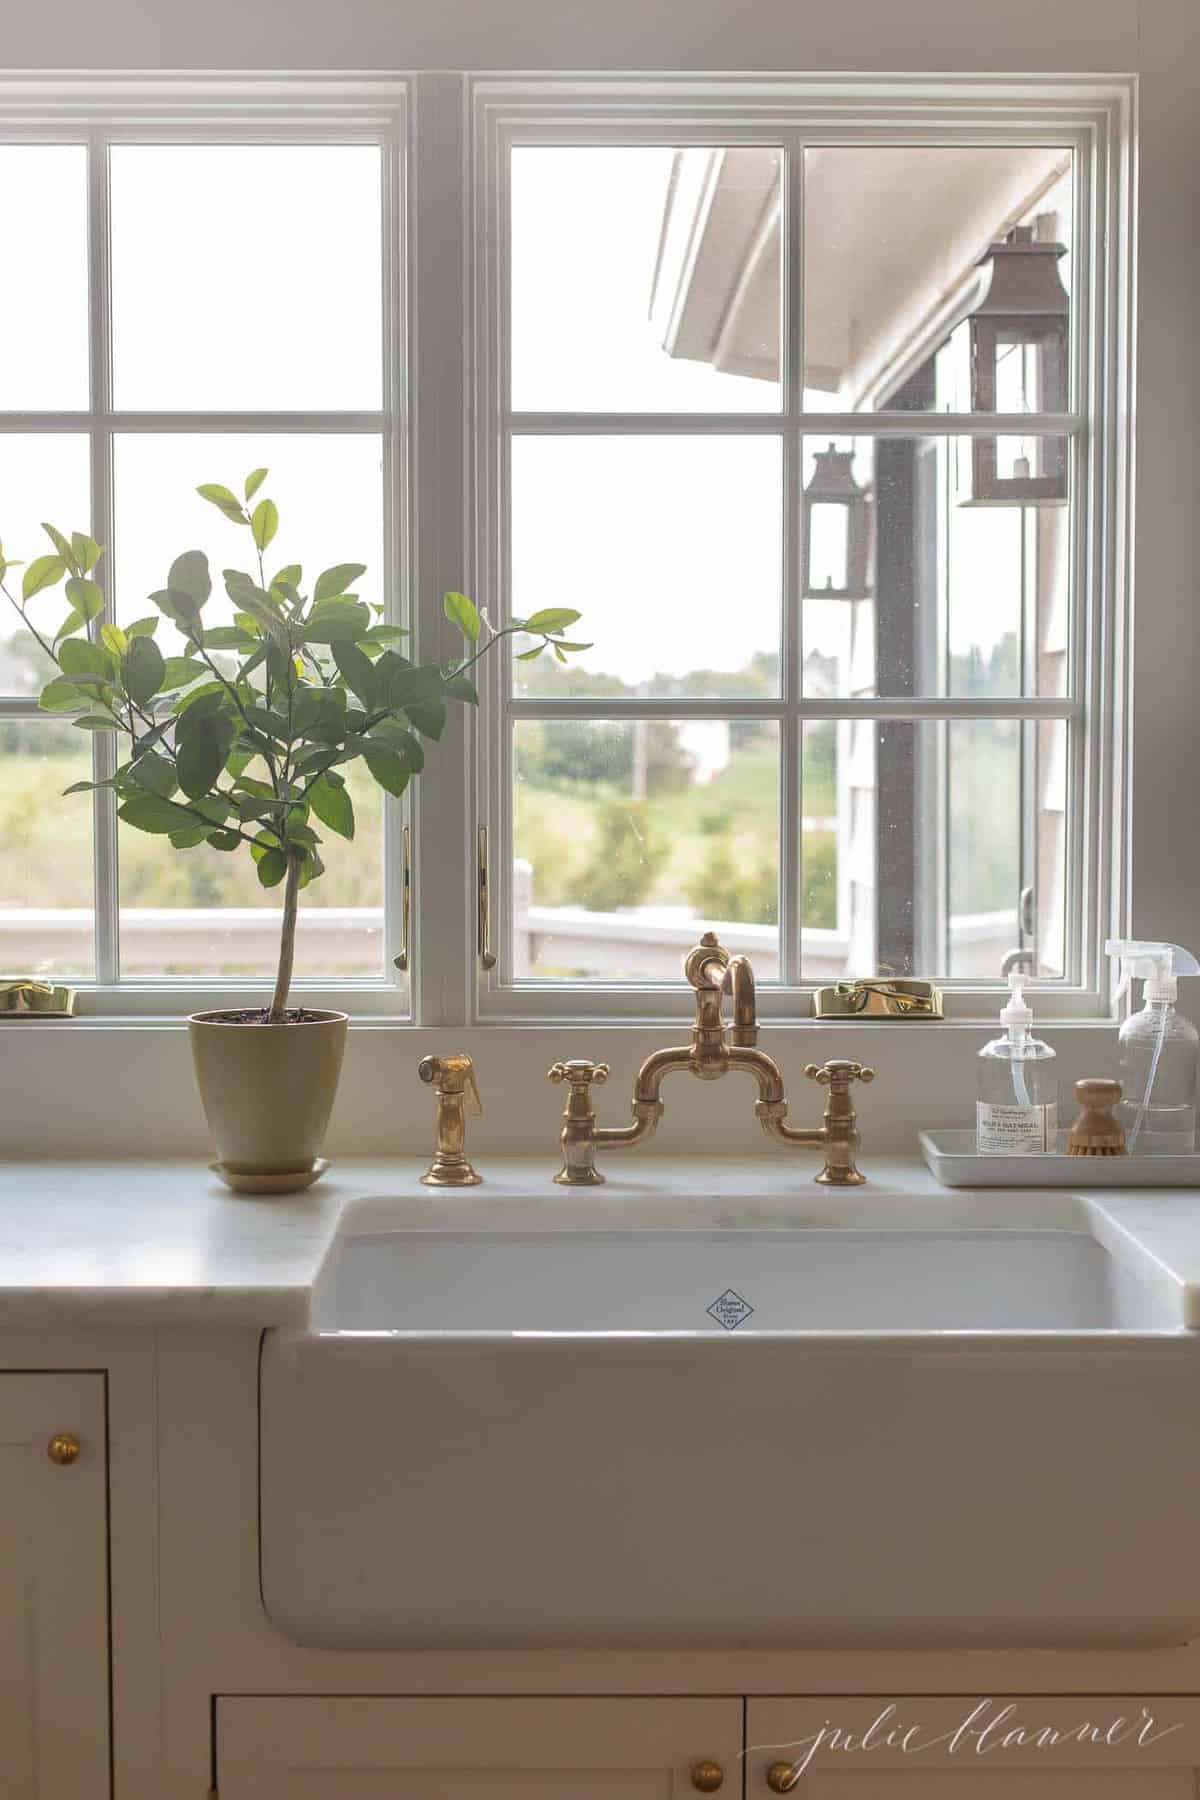 A white kitchen sink area, with a topiary style potted Meyer lemon tree.